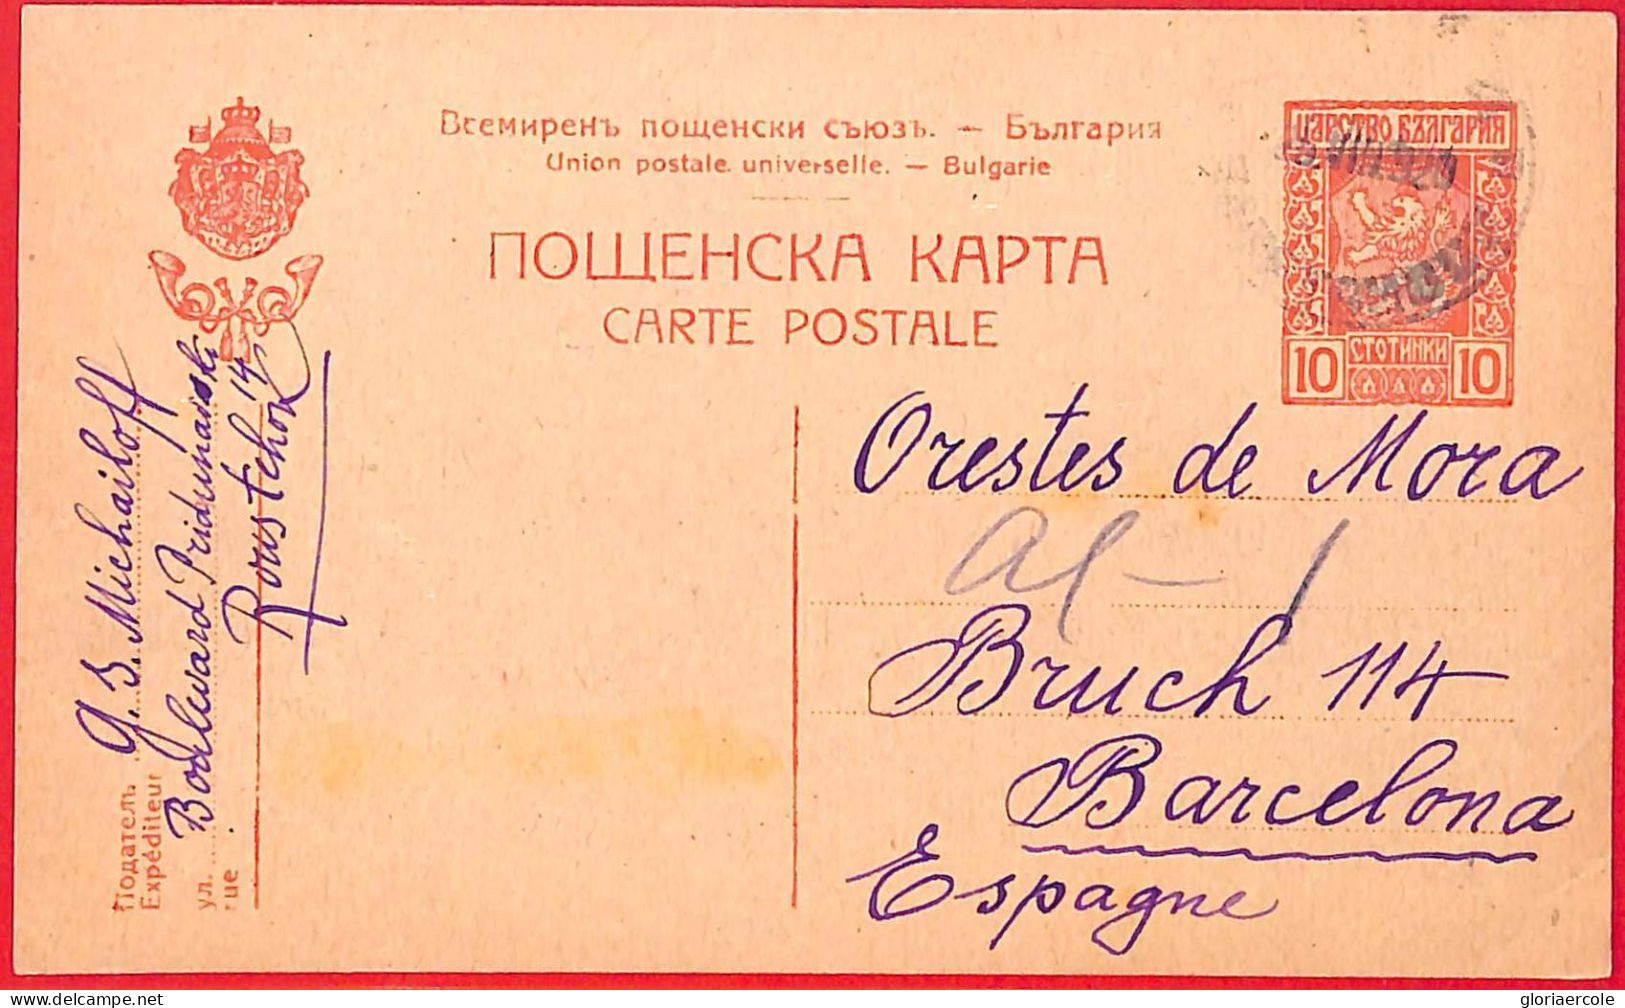 Aa0506 - BULGARIA - Postal History - STATIONERY CARD From ROUSTOUCK To SPAIN 1924 - Cartes Postales